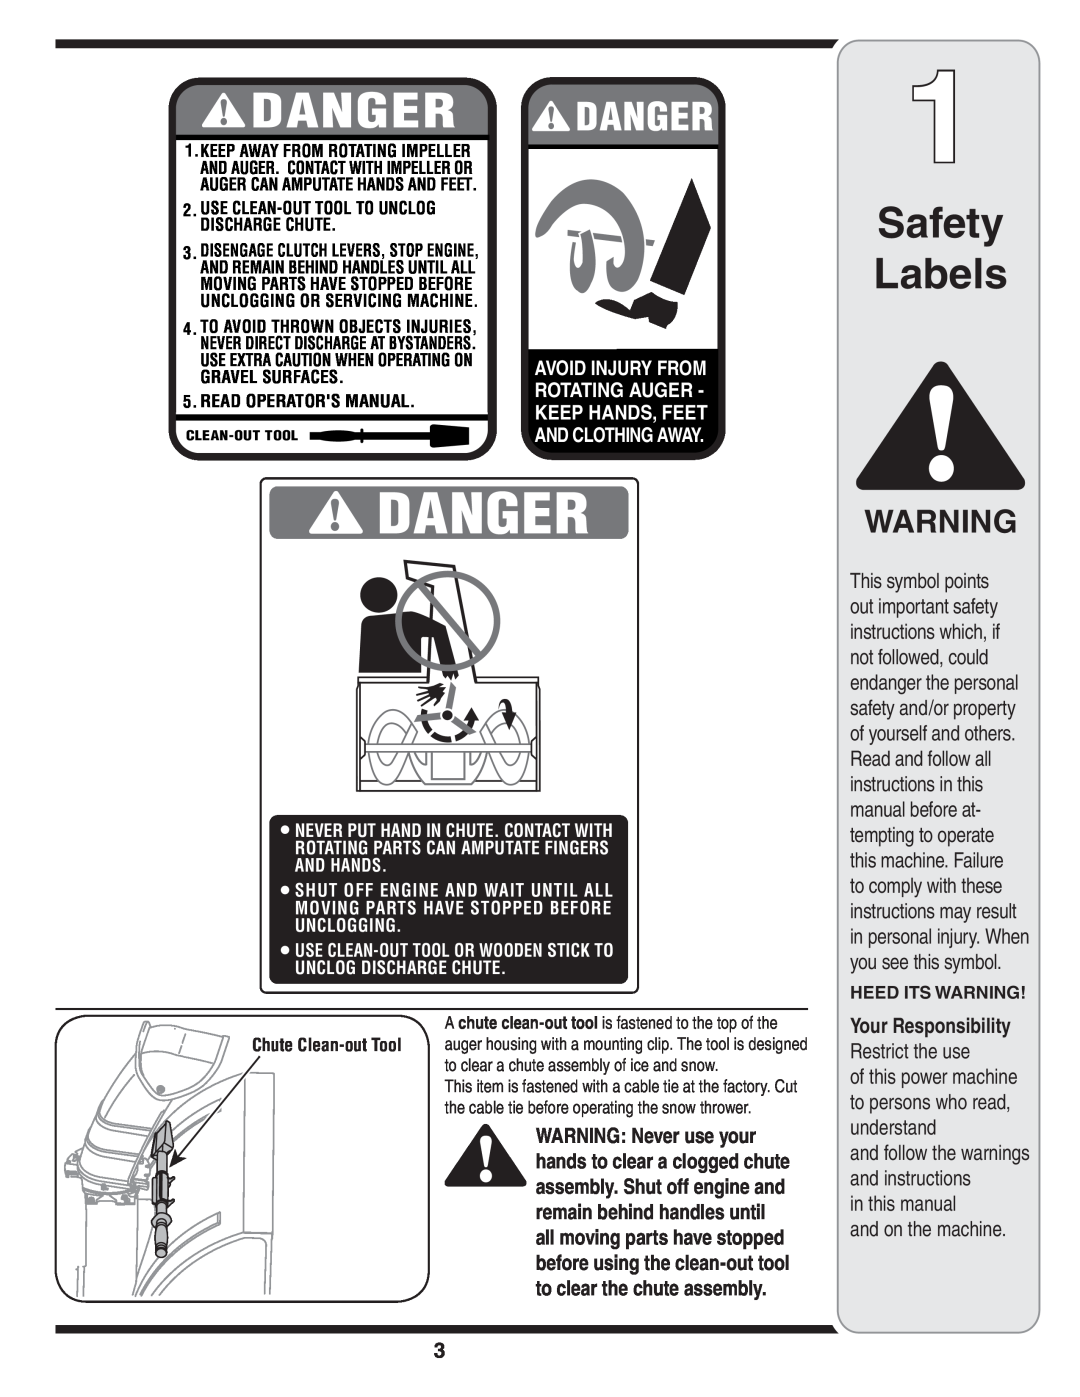 Bolens D Style Safety Labels, Restrict the use, in this manual and on the machine, Your Responsibility, Heed Its Warning 